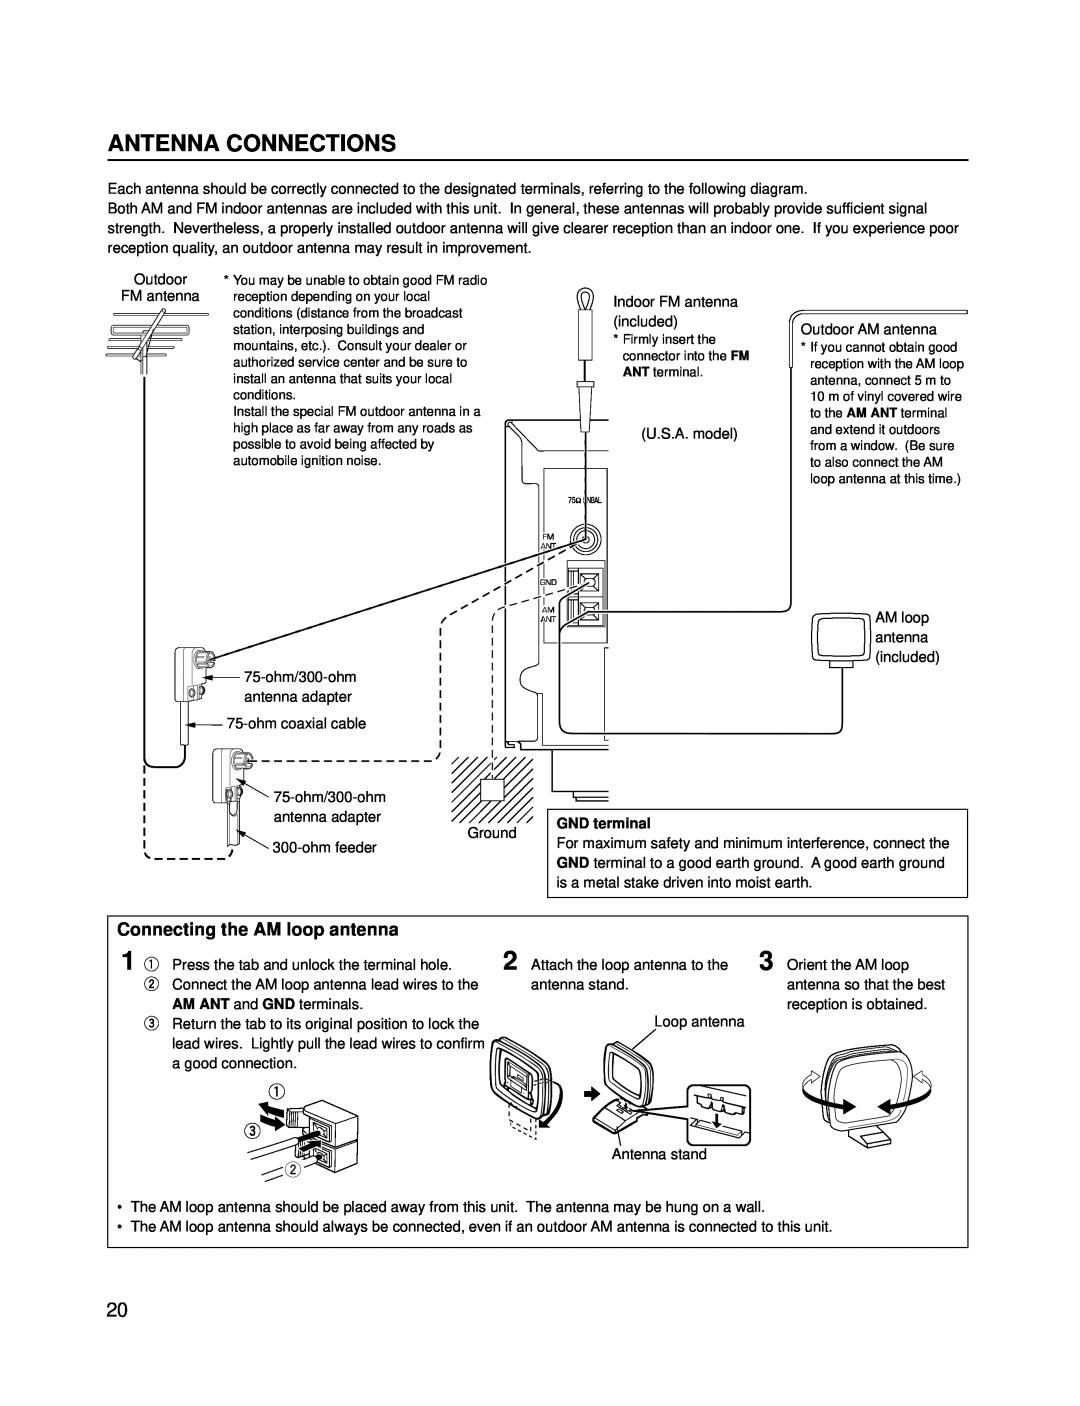 Yamaha RX-V595A owner manual Antenna Connections, Connecting the AM loop antenna 